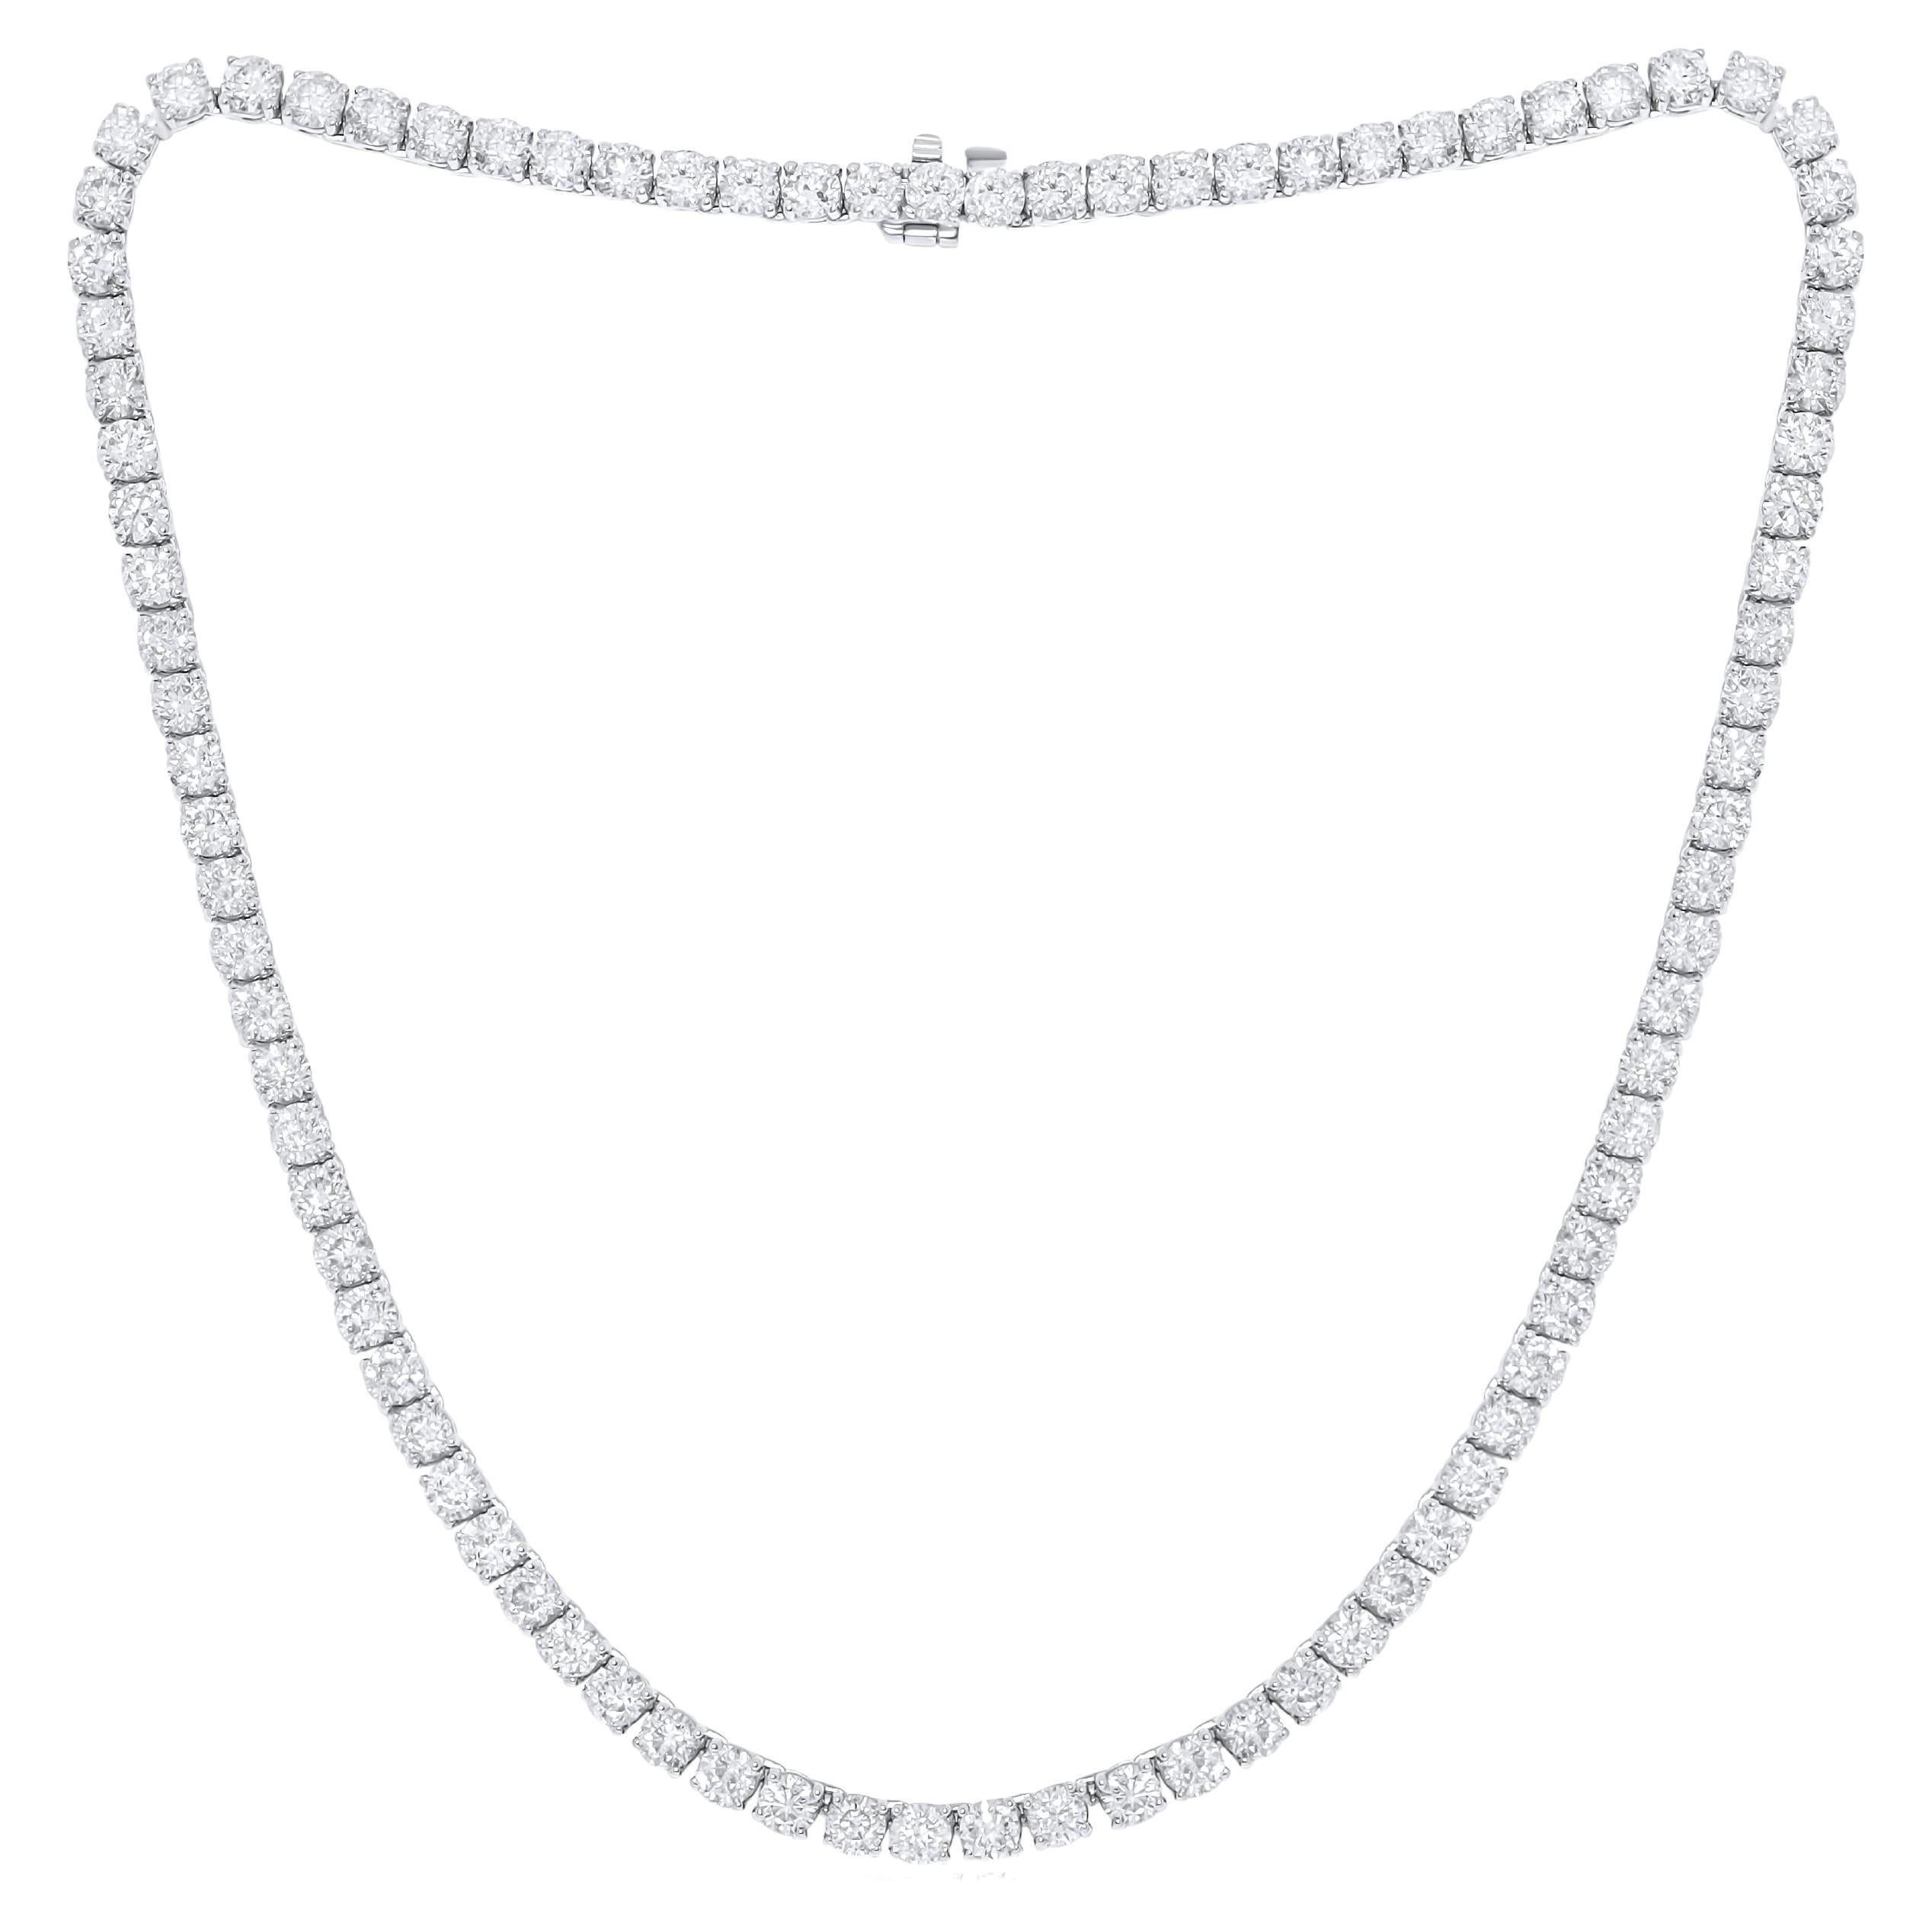 Diana M. 18 kt white gold, 16" 4 prong diamond tennis necklace  with 27cts For Sale